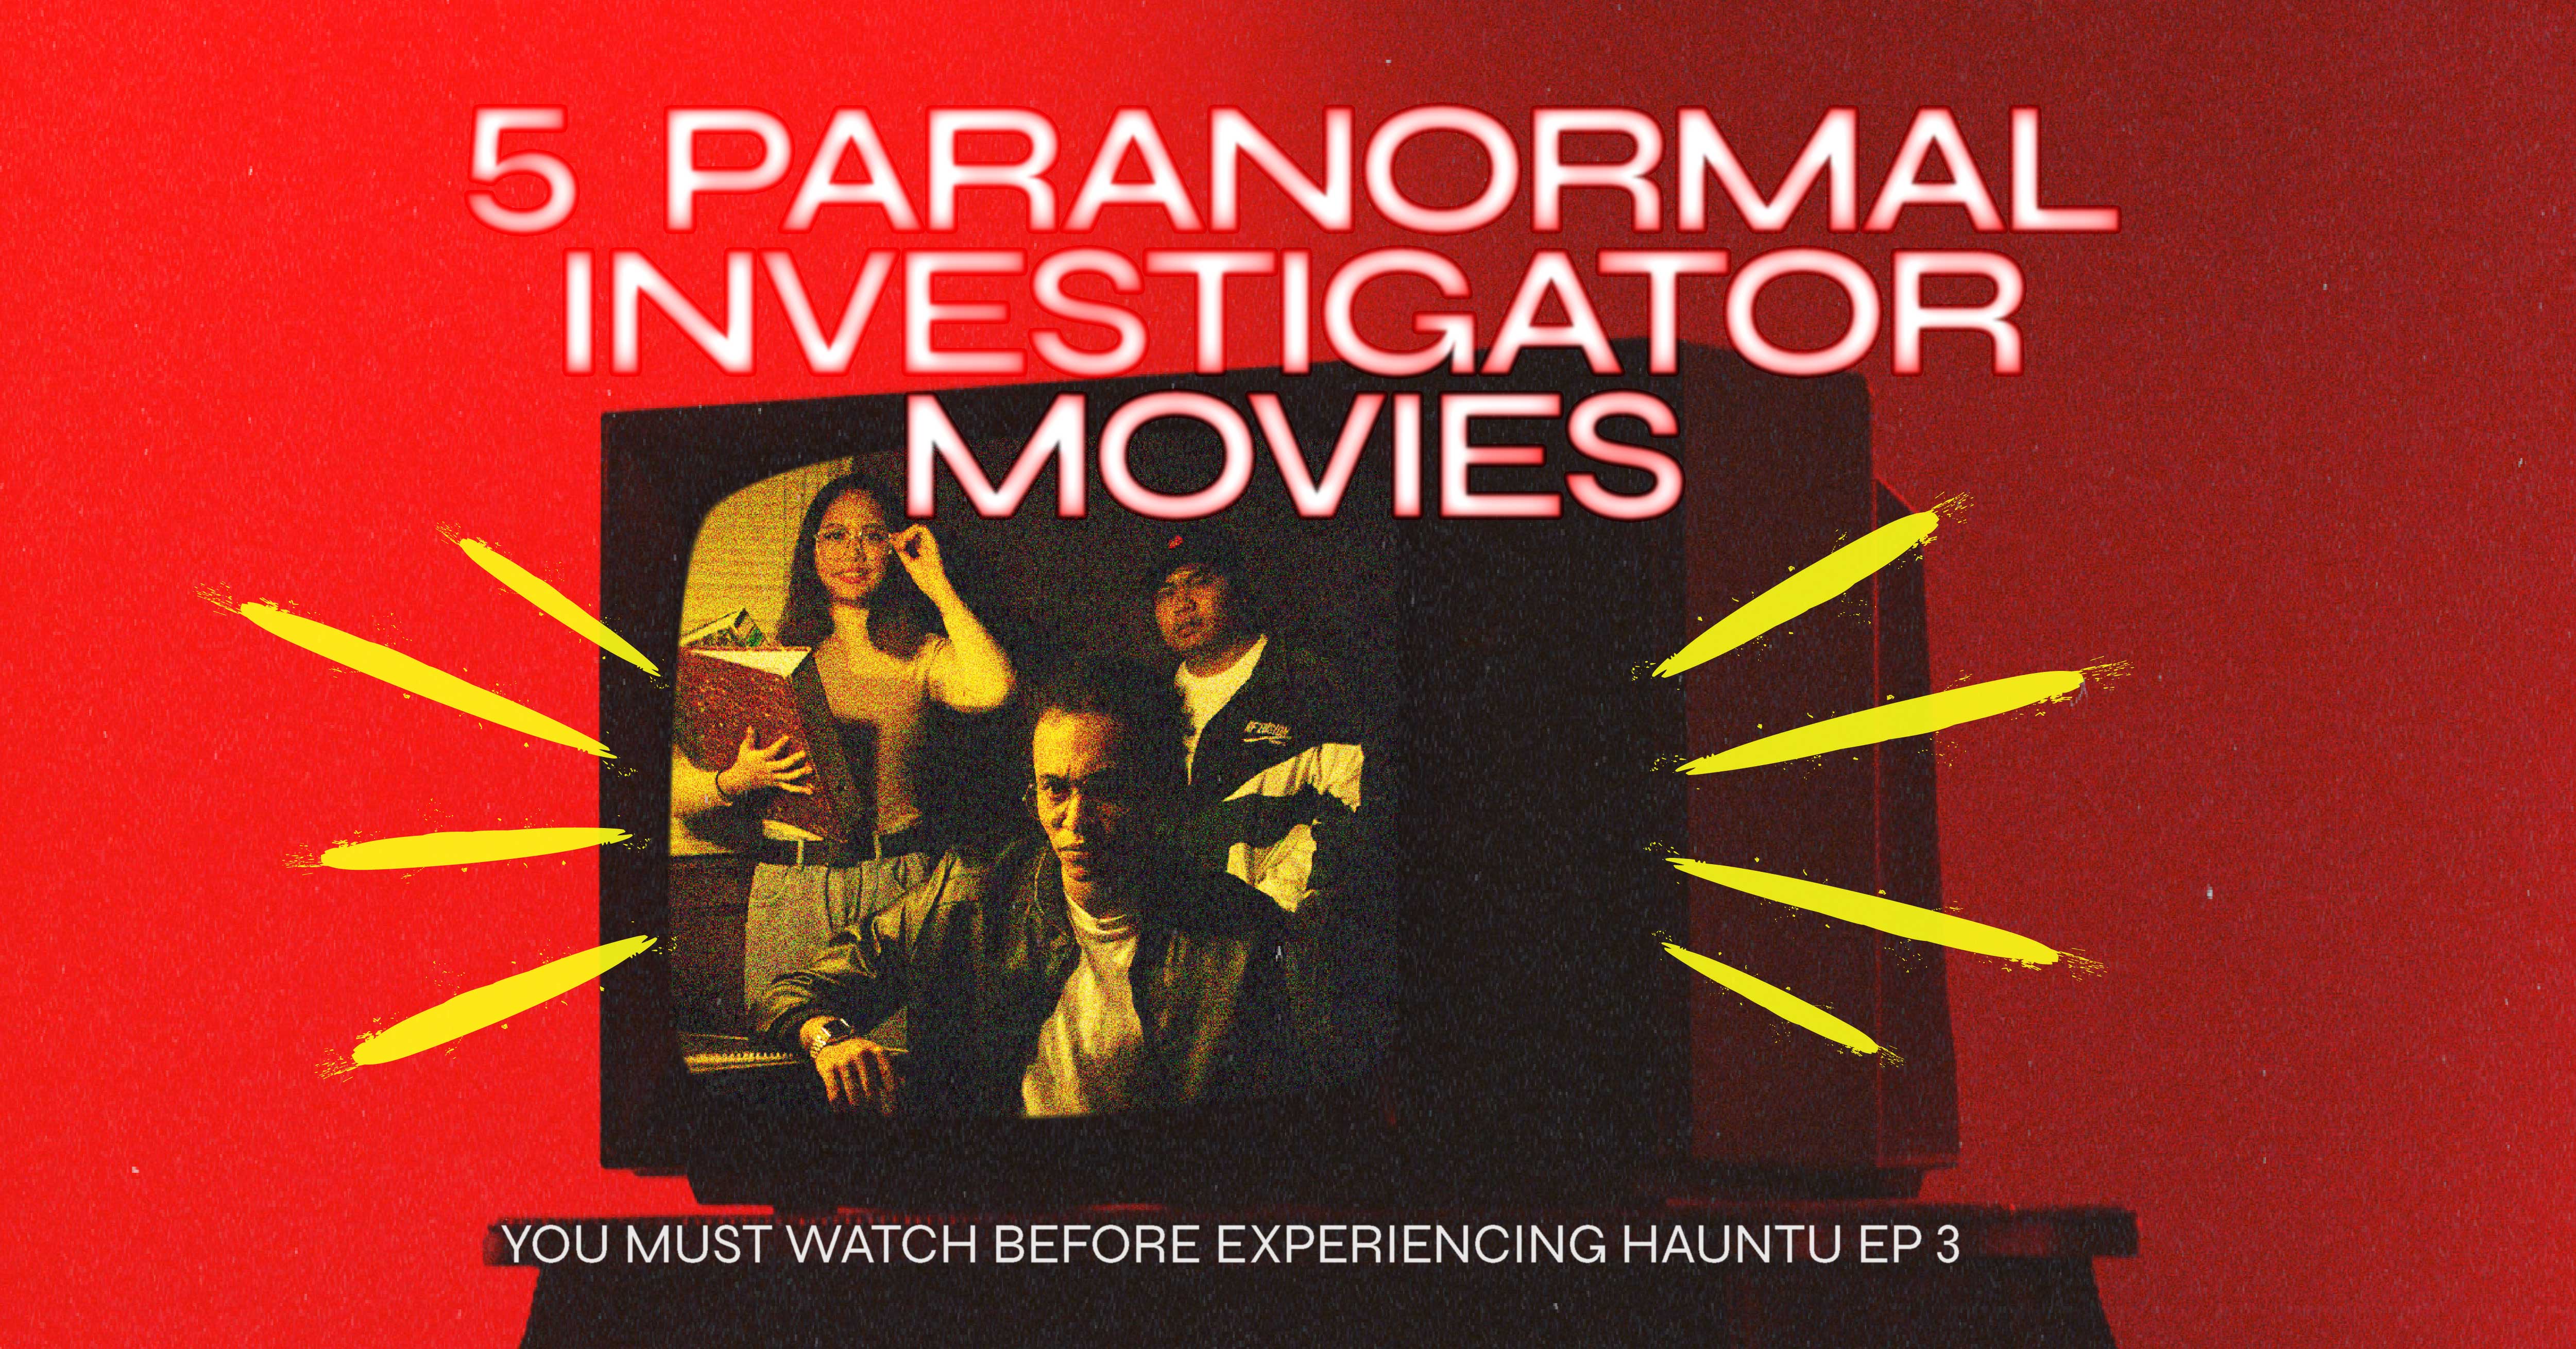 5 Paranormal investigators movies suggestion by Hauntu Image Cover